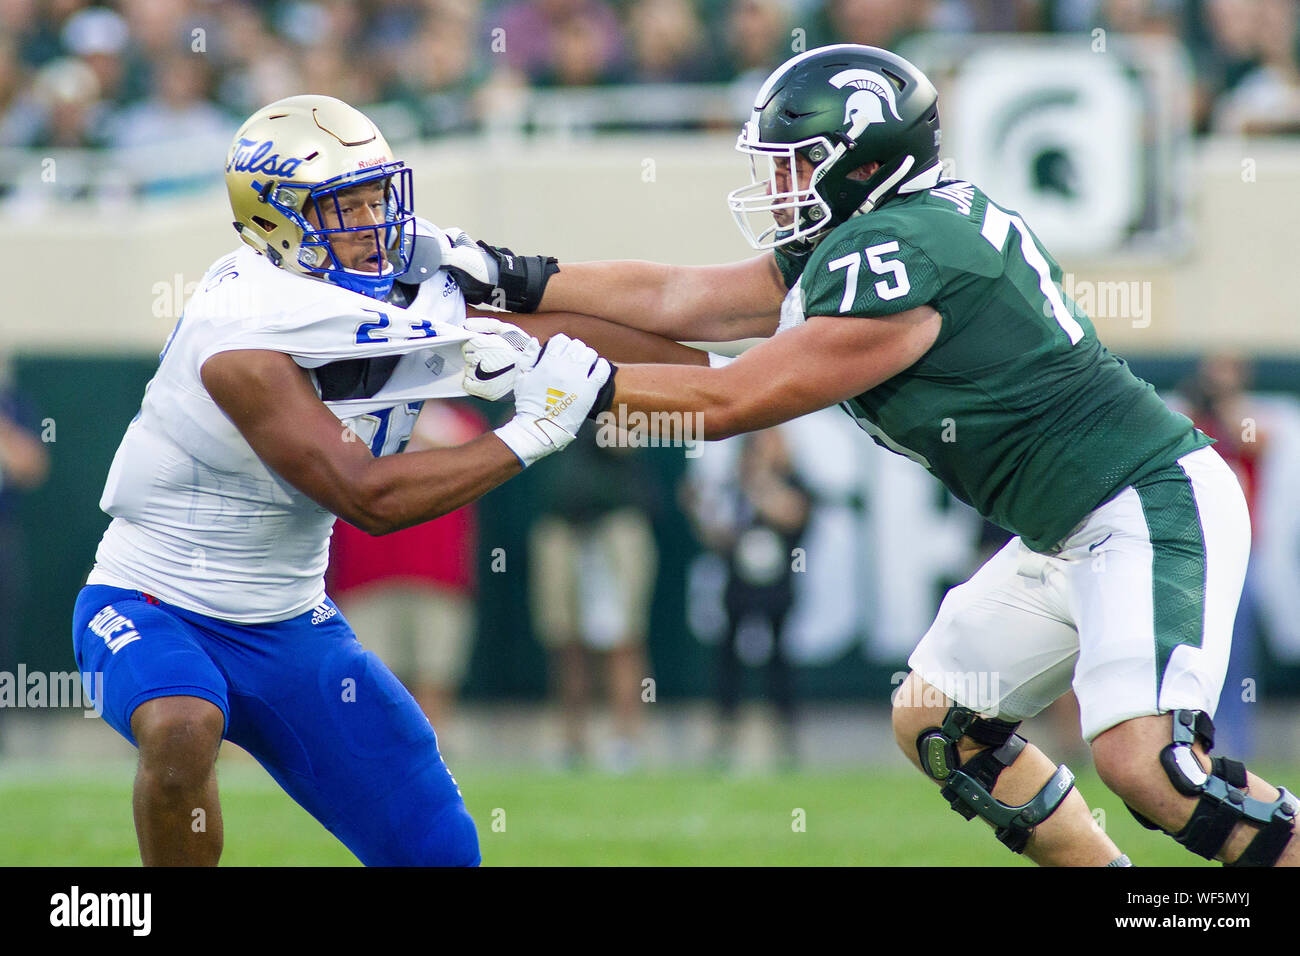 East Lansing, Michigan, USA. 30th Aug, 2019. Michigan State offensive guard KEVIN JARVIS (75) blocks Tulsa linebacker ZAVEN COLLINS (23) during Michigan State's 28-7 victory over Tulsa at Spartan Stadium. Credit: Scott Mapes/ZUMA Wire/Alamy Live News Stock Photo